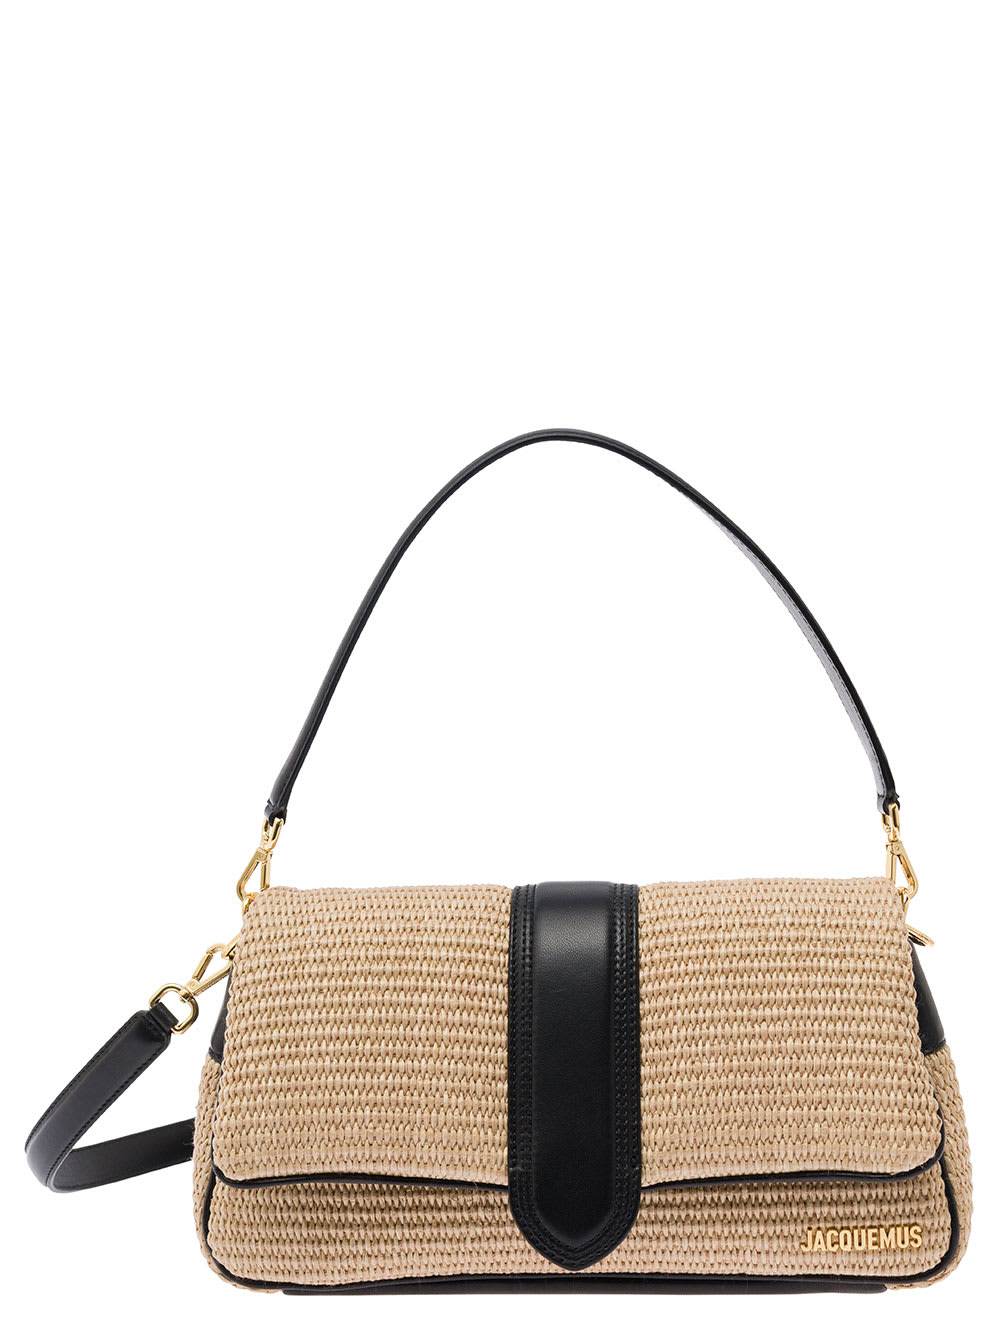 JACQUEMUS LE BAMBIMOU BEIGE SHOULDER BAG WITH LOGO LETTERING DETAIL IN RAFIA AND LEATHER WOMAN